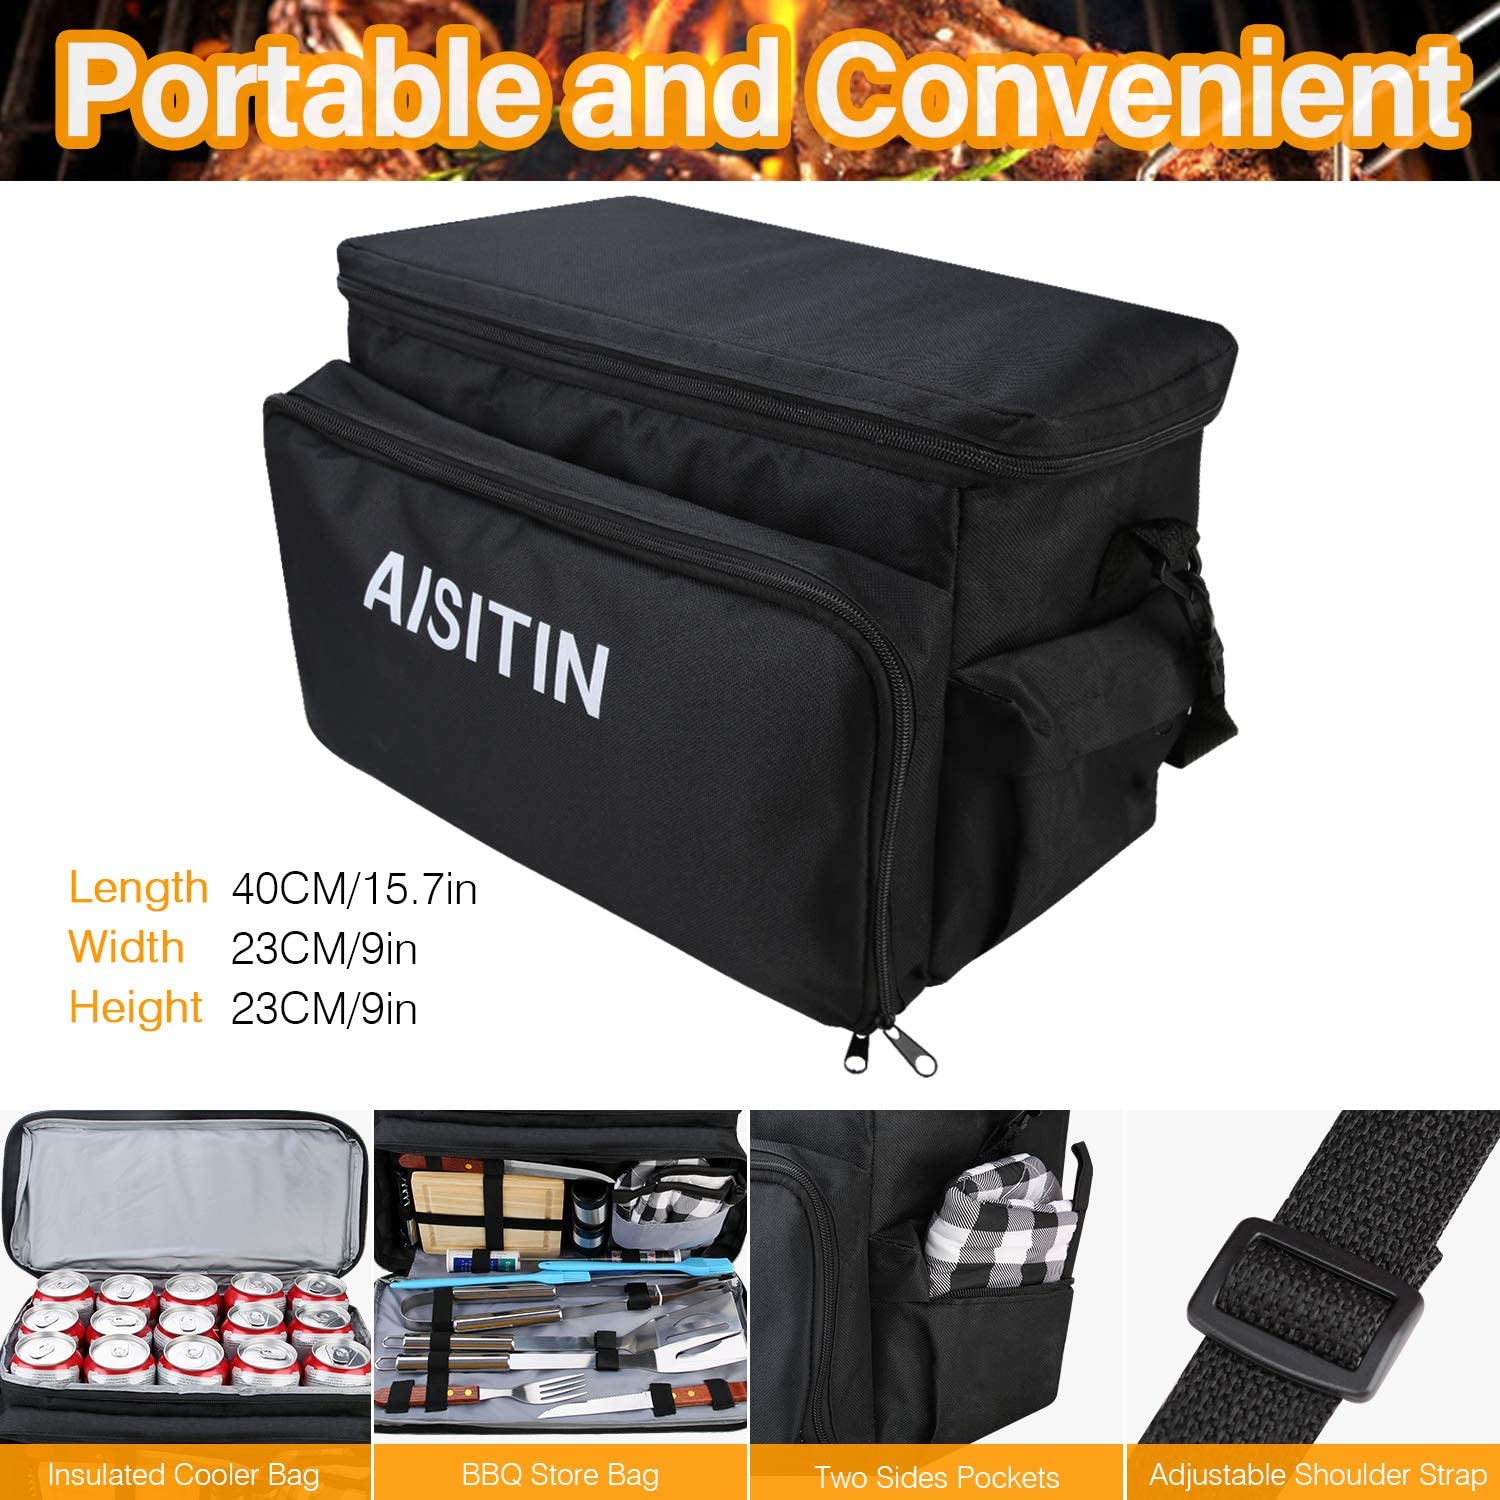 AISITIN BBQ Grill Accessories with Insulated Cooler Bag, Grill Utensils Set BBQ Grilling Accessories BBQ Tools Set, Stainless Steel Grill Set for Smoker, Camping, Kitchen Grill Tool Set for Men - image 2 of 9